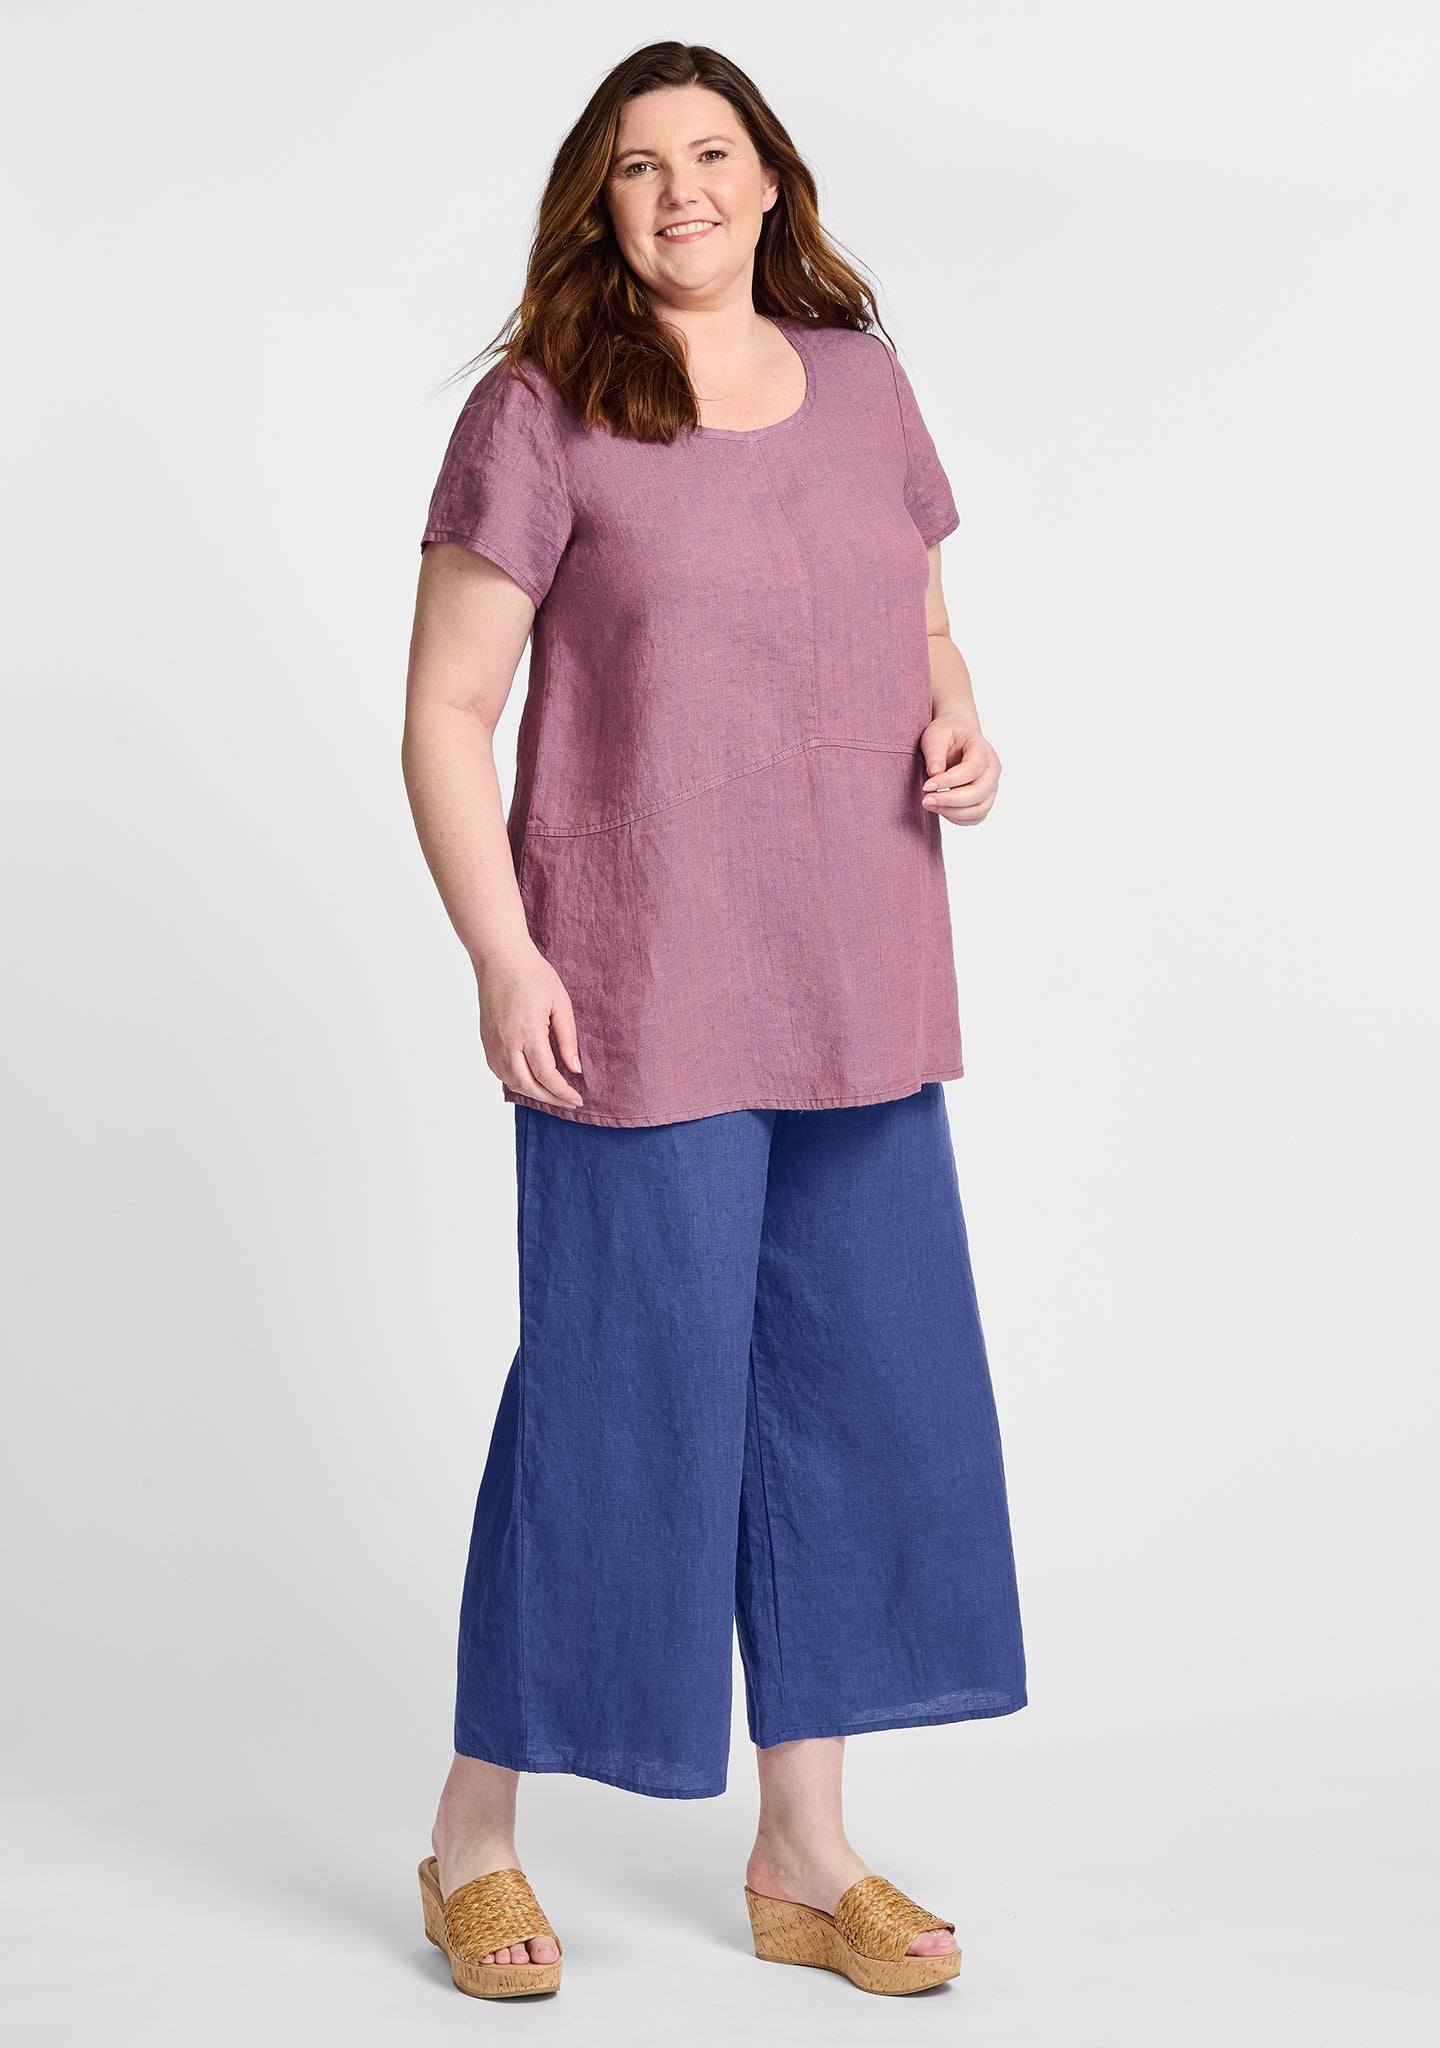 FLAX linen shirt in purple with linen pants in blue